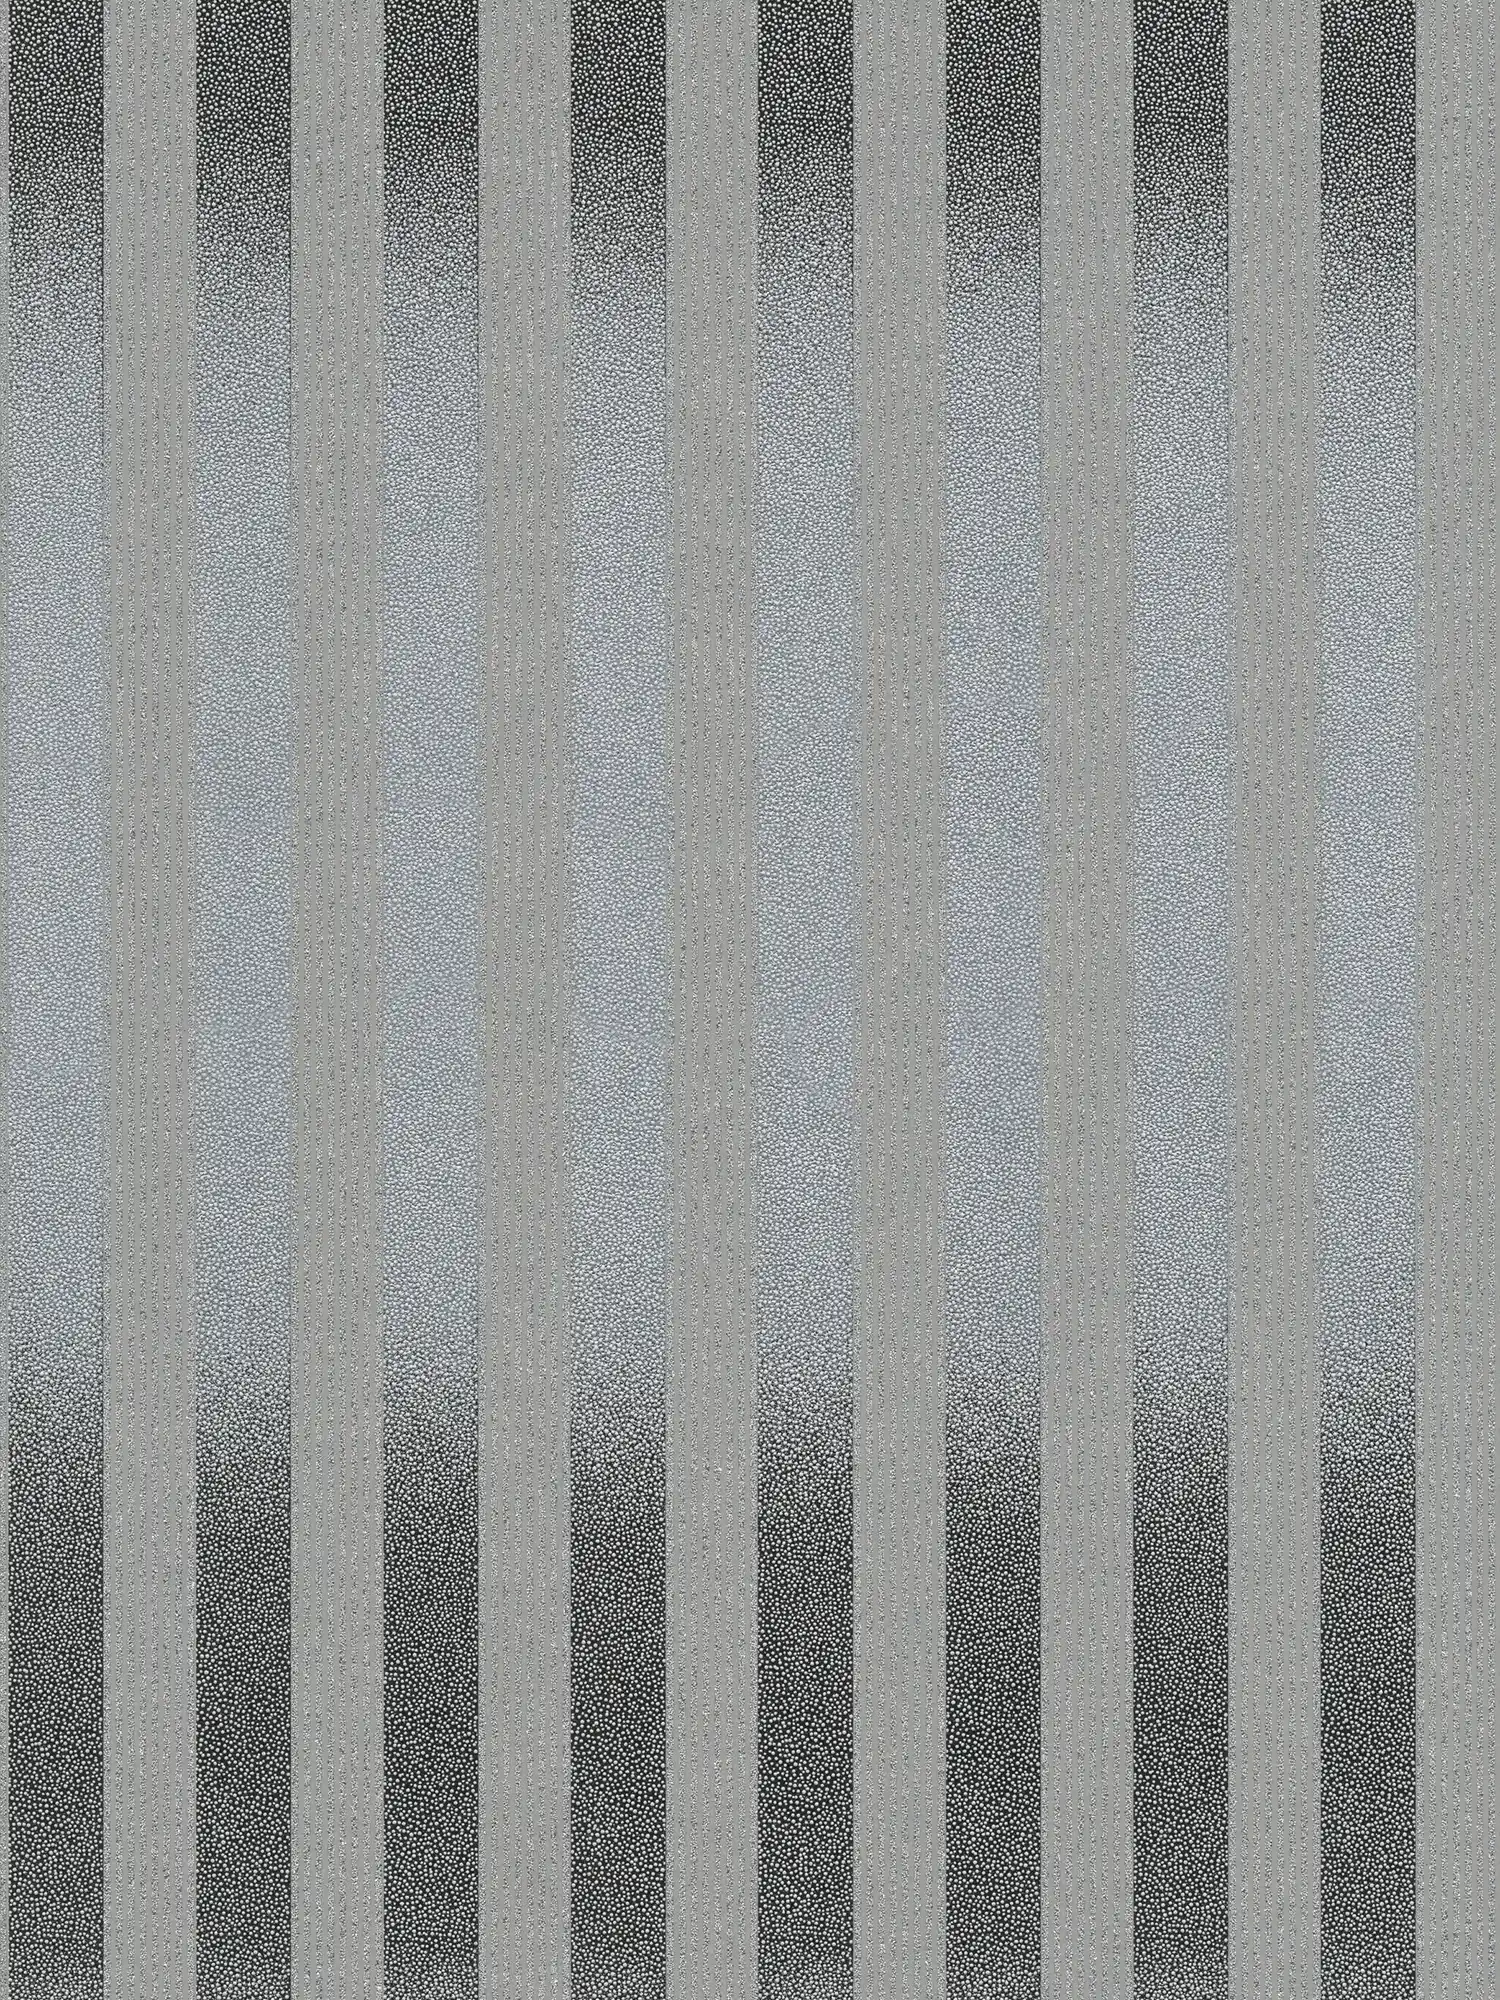 Striped wallpaper with small dot pattern and colour gradient - black, grey
